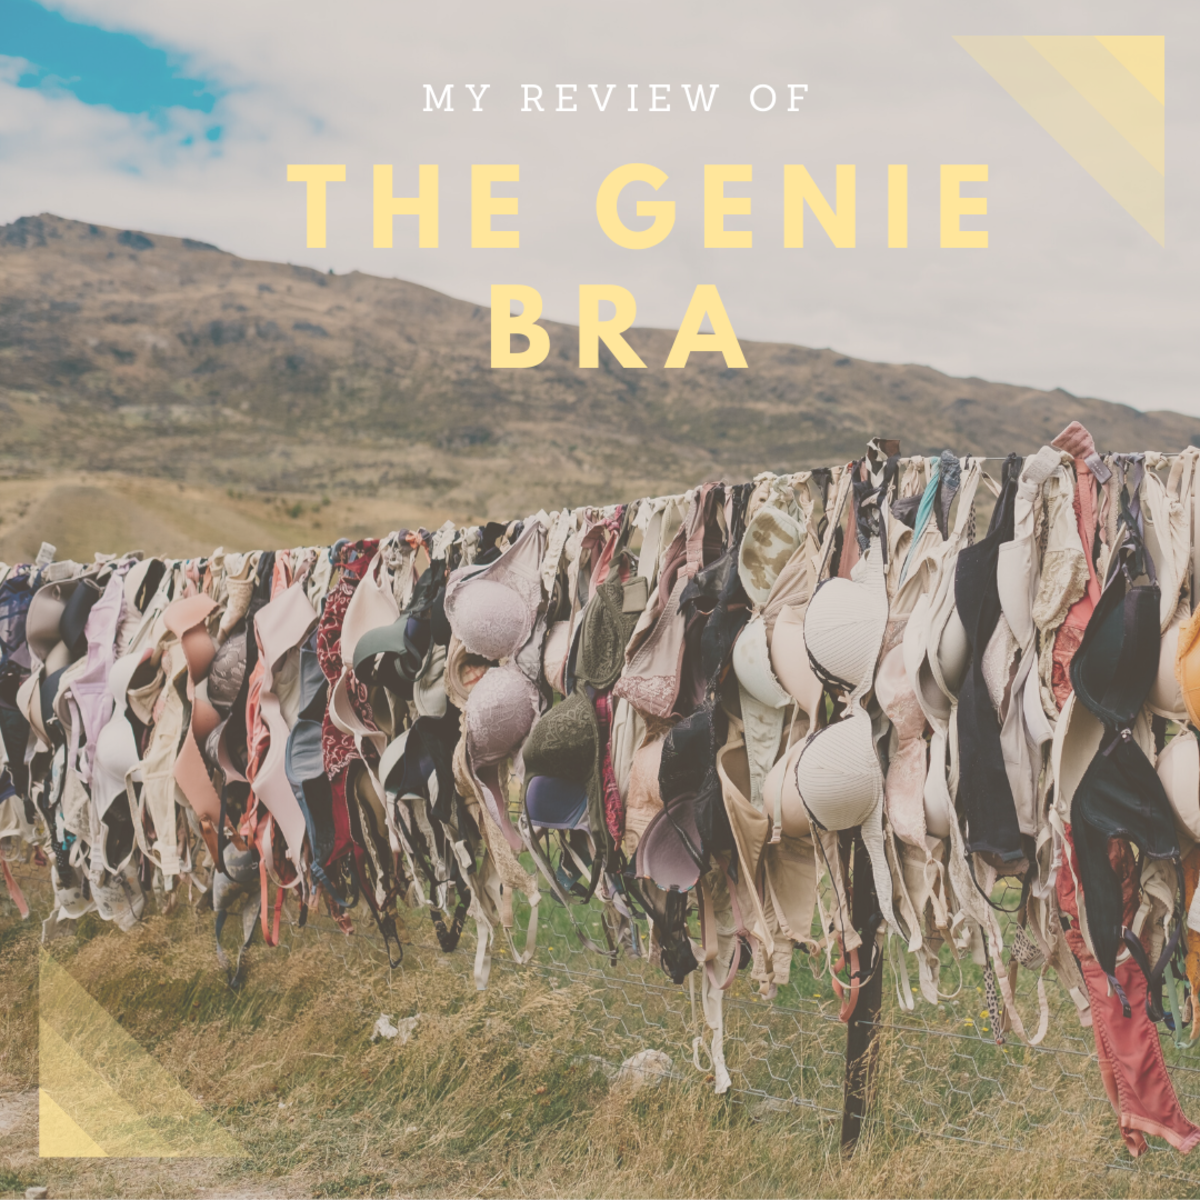 A Review of the Genie Bra: The Good, the Bad, and the Facts